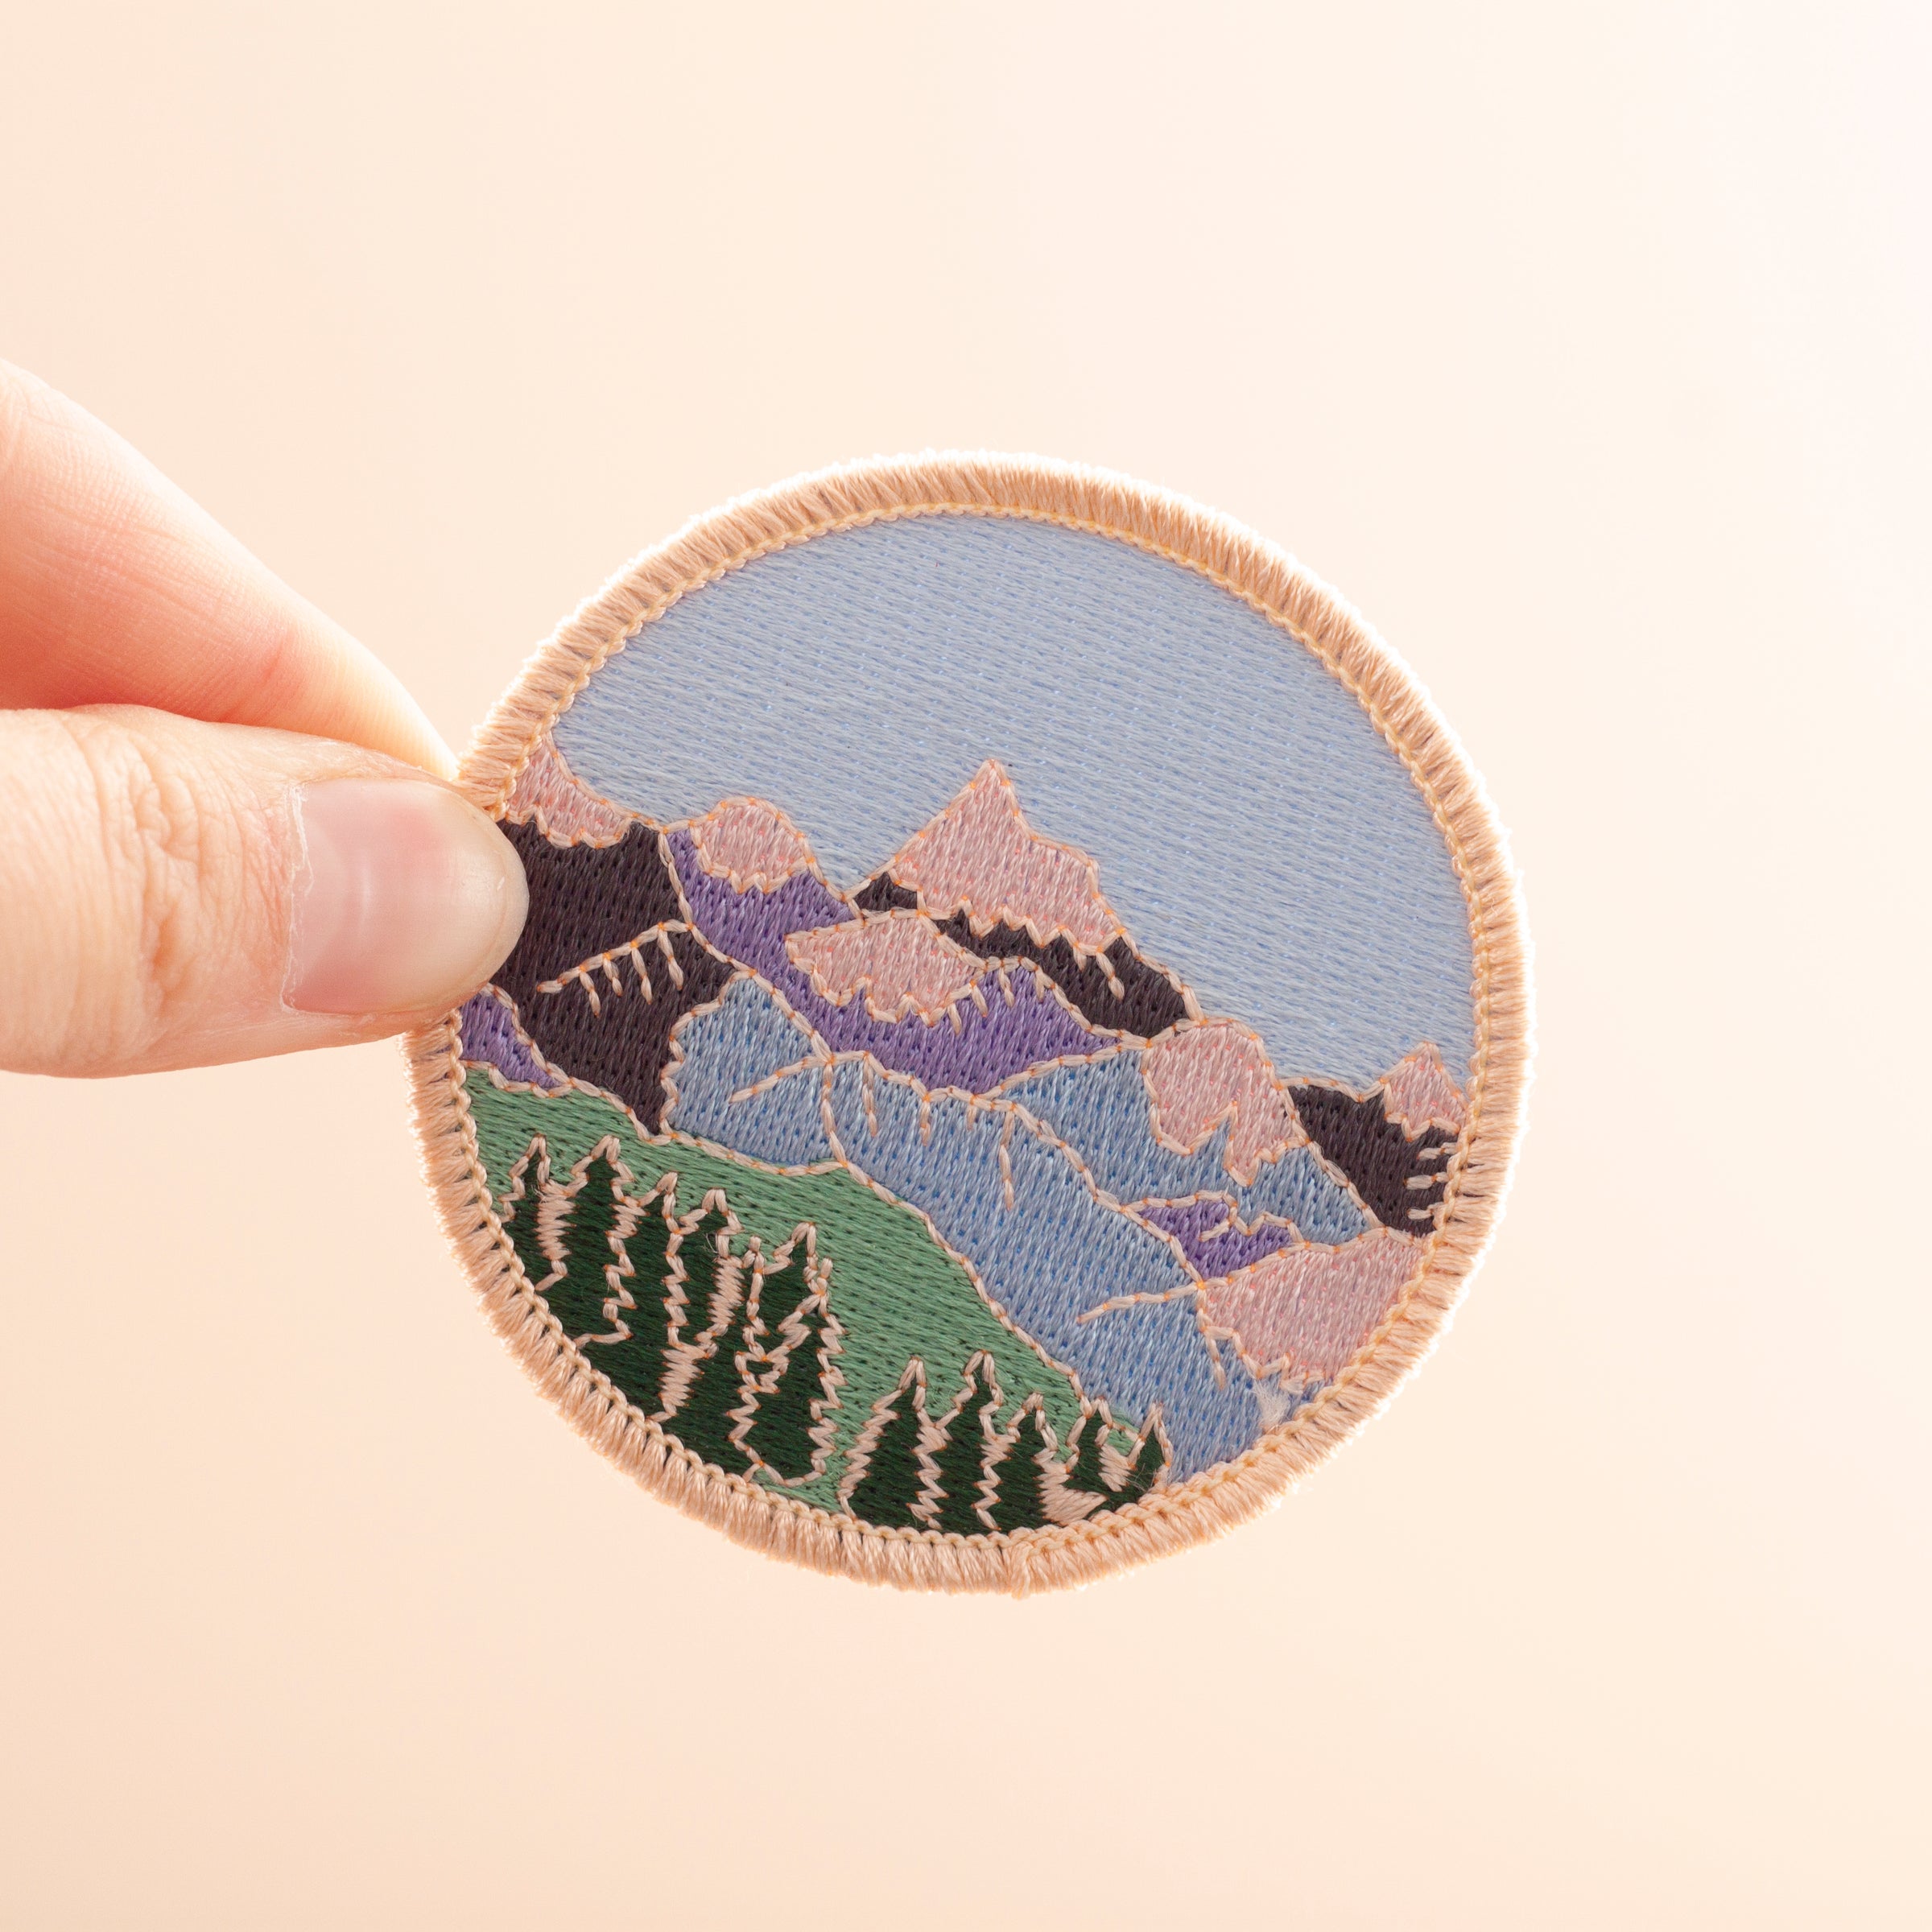 Iron-on Patch Outdoor Mountains Nature Patches or Patches Iron-on